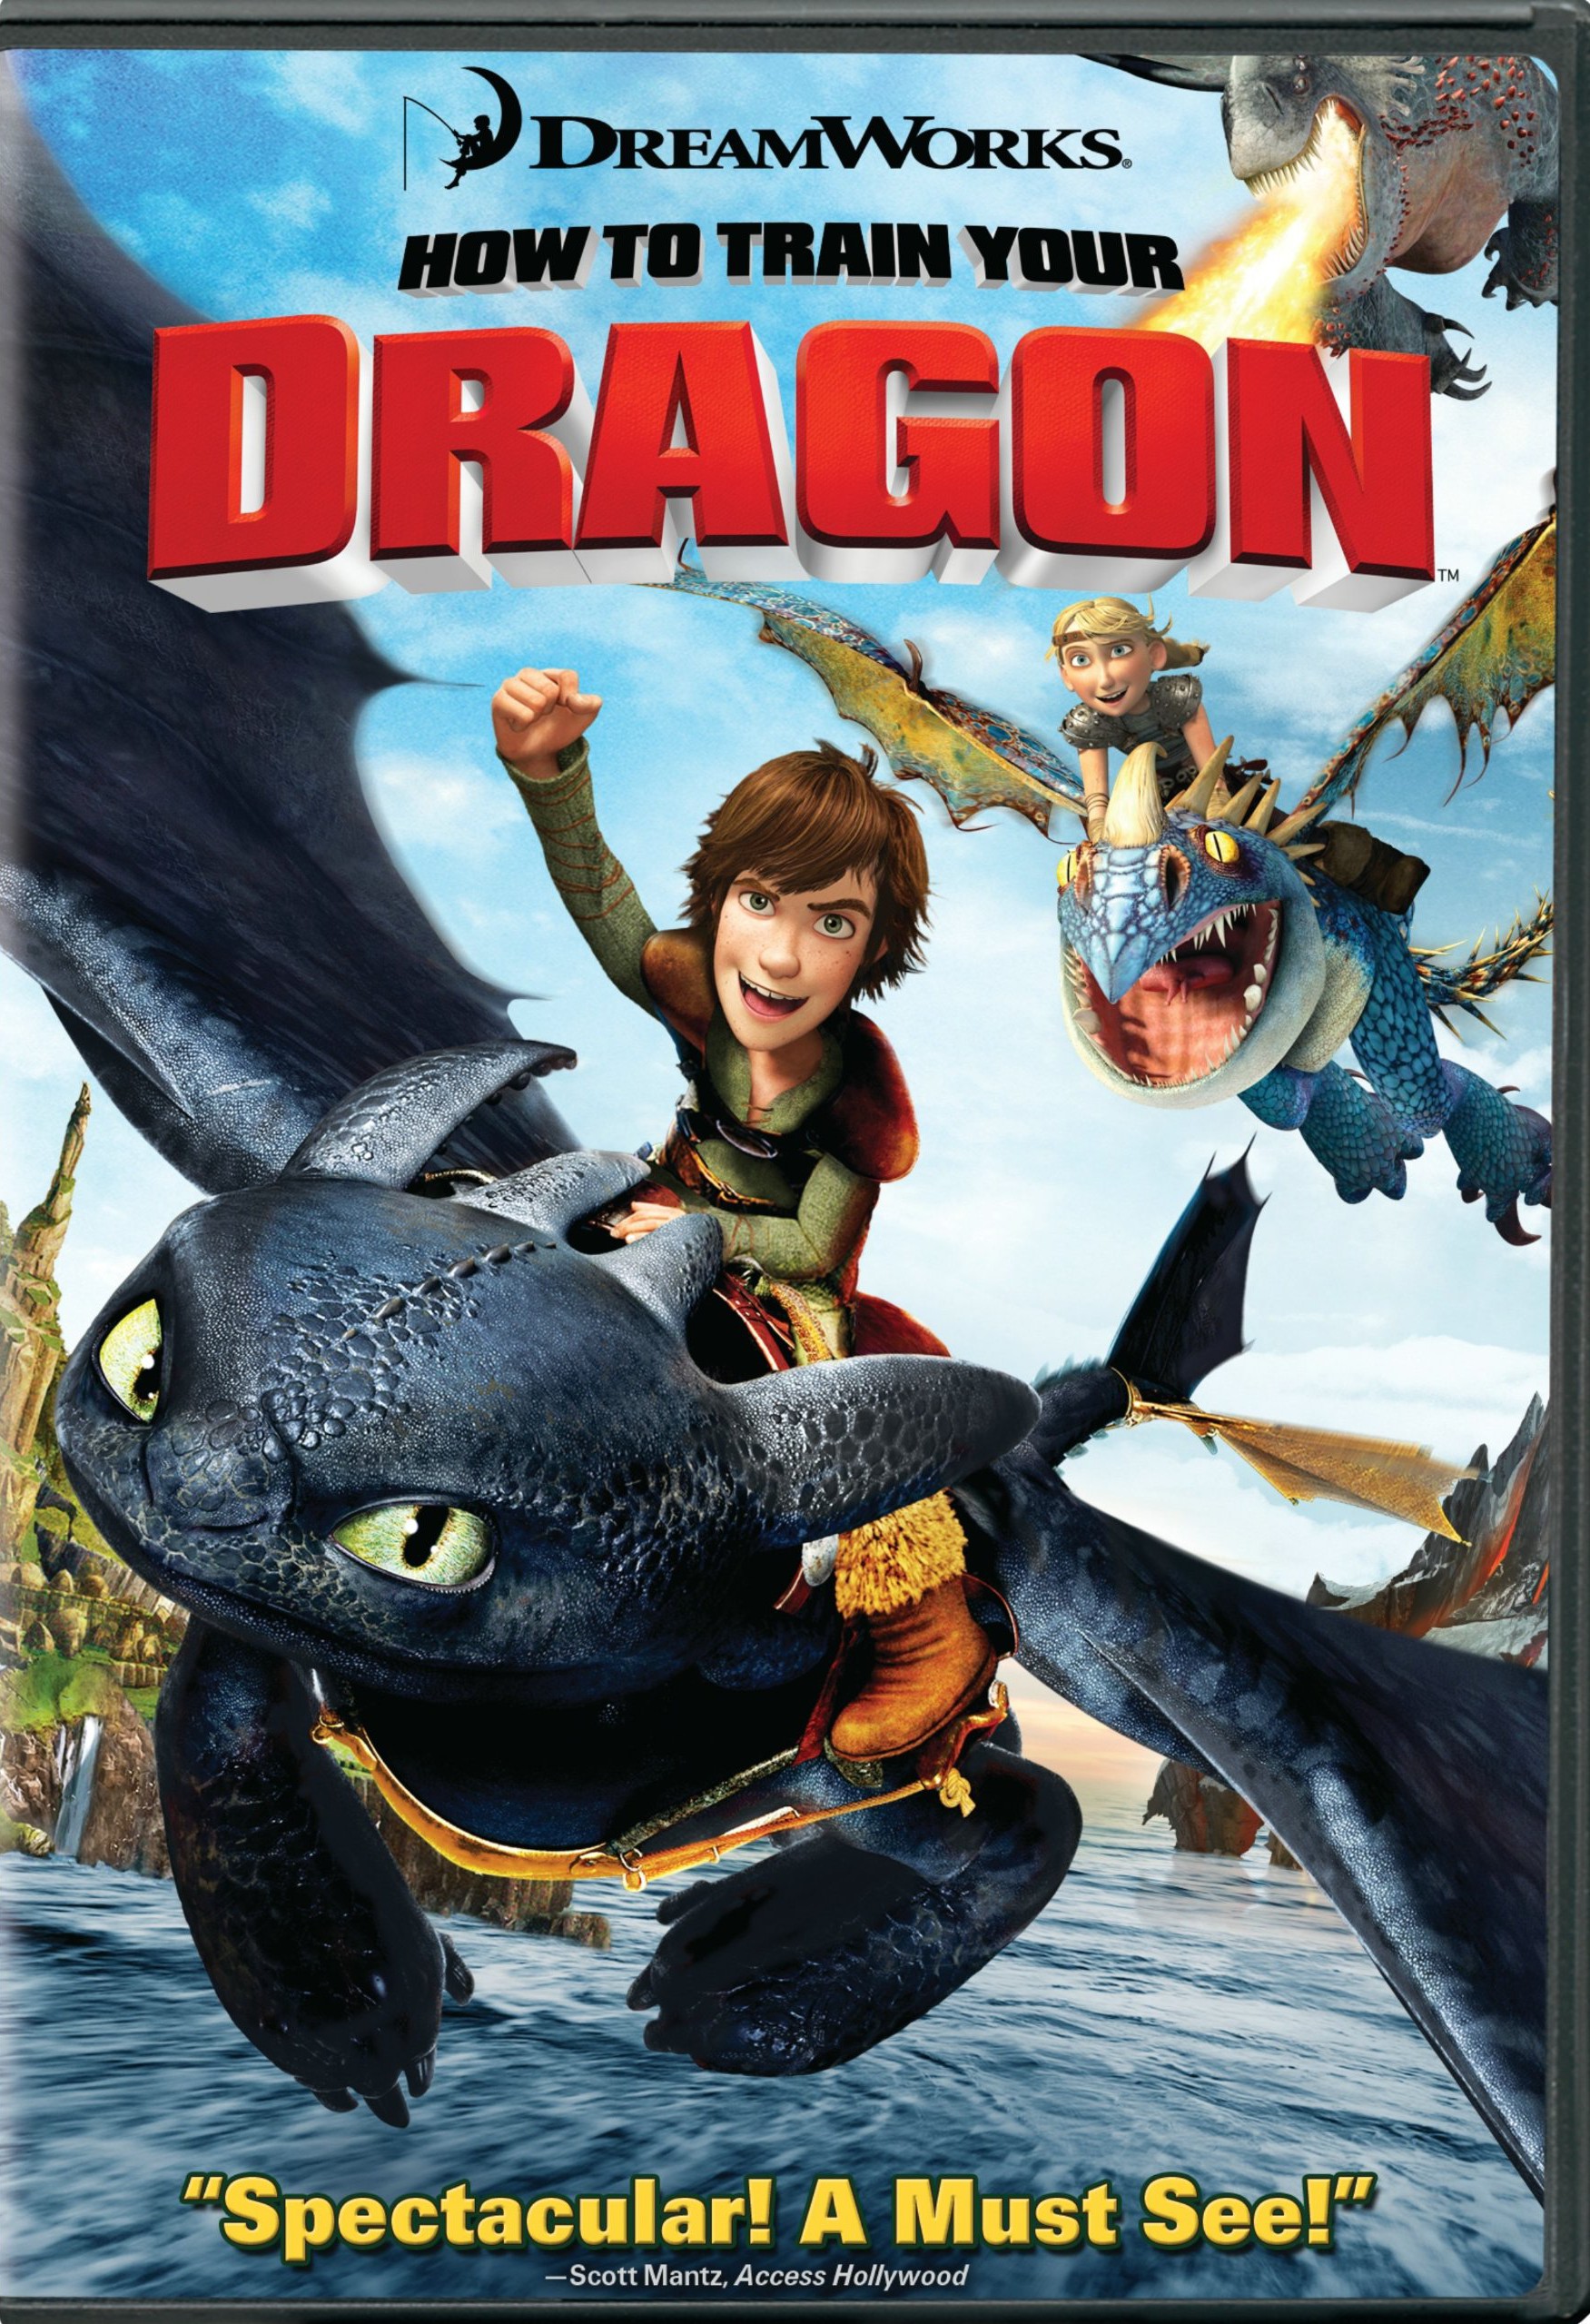 How to Train Your Dragon DVD Release Date October 15, 2010